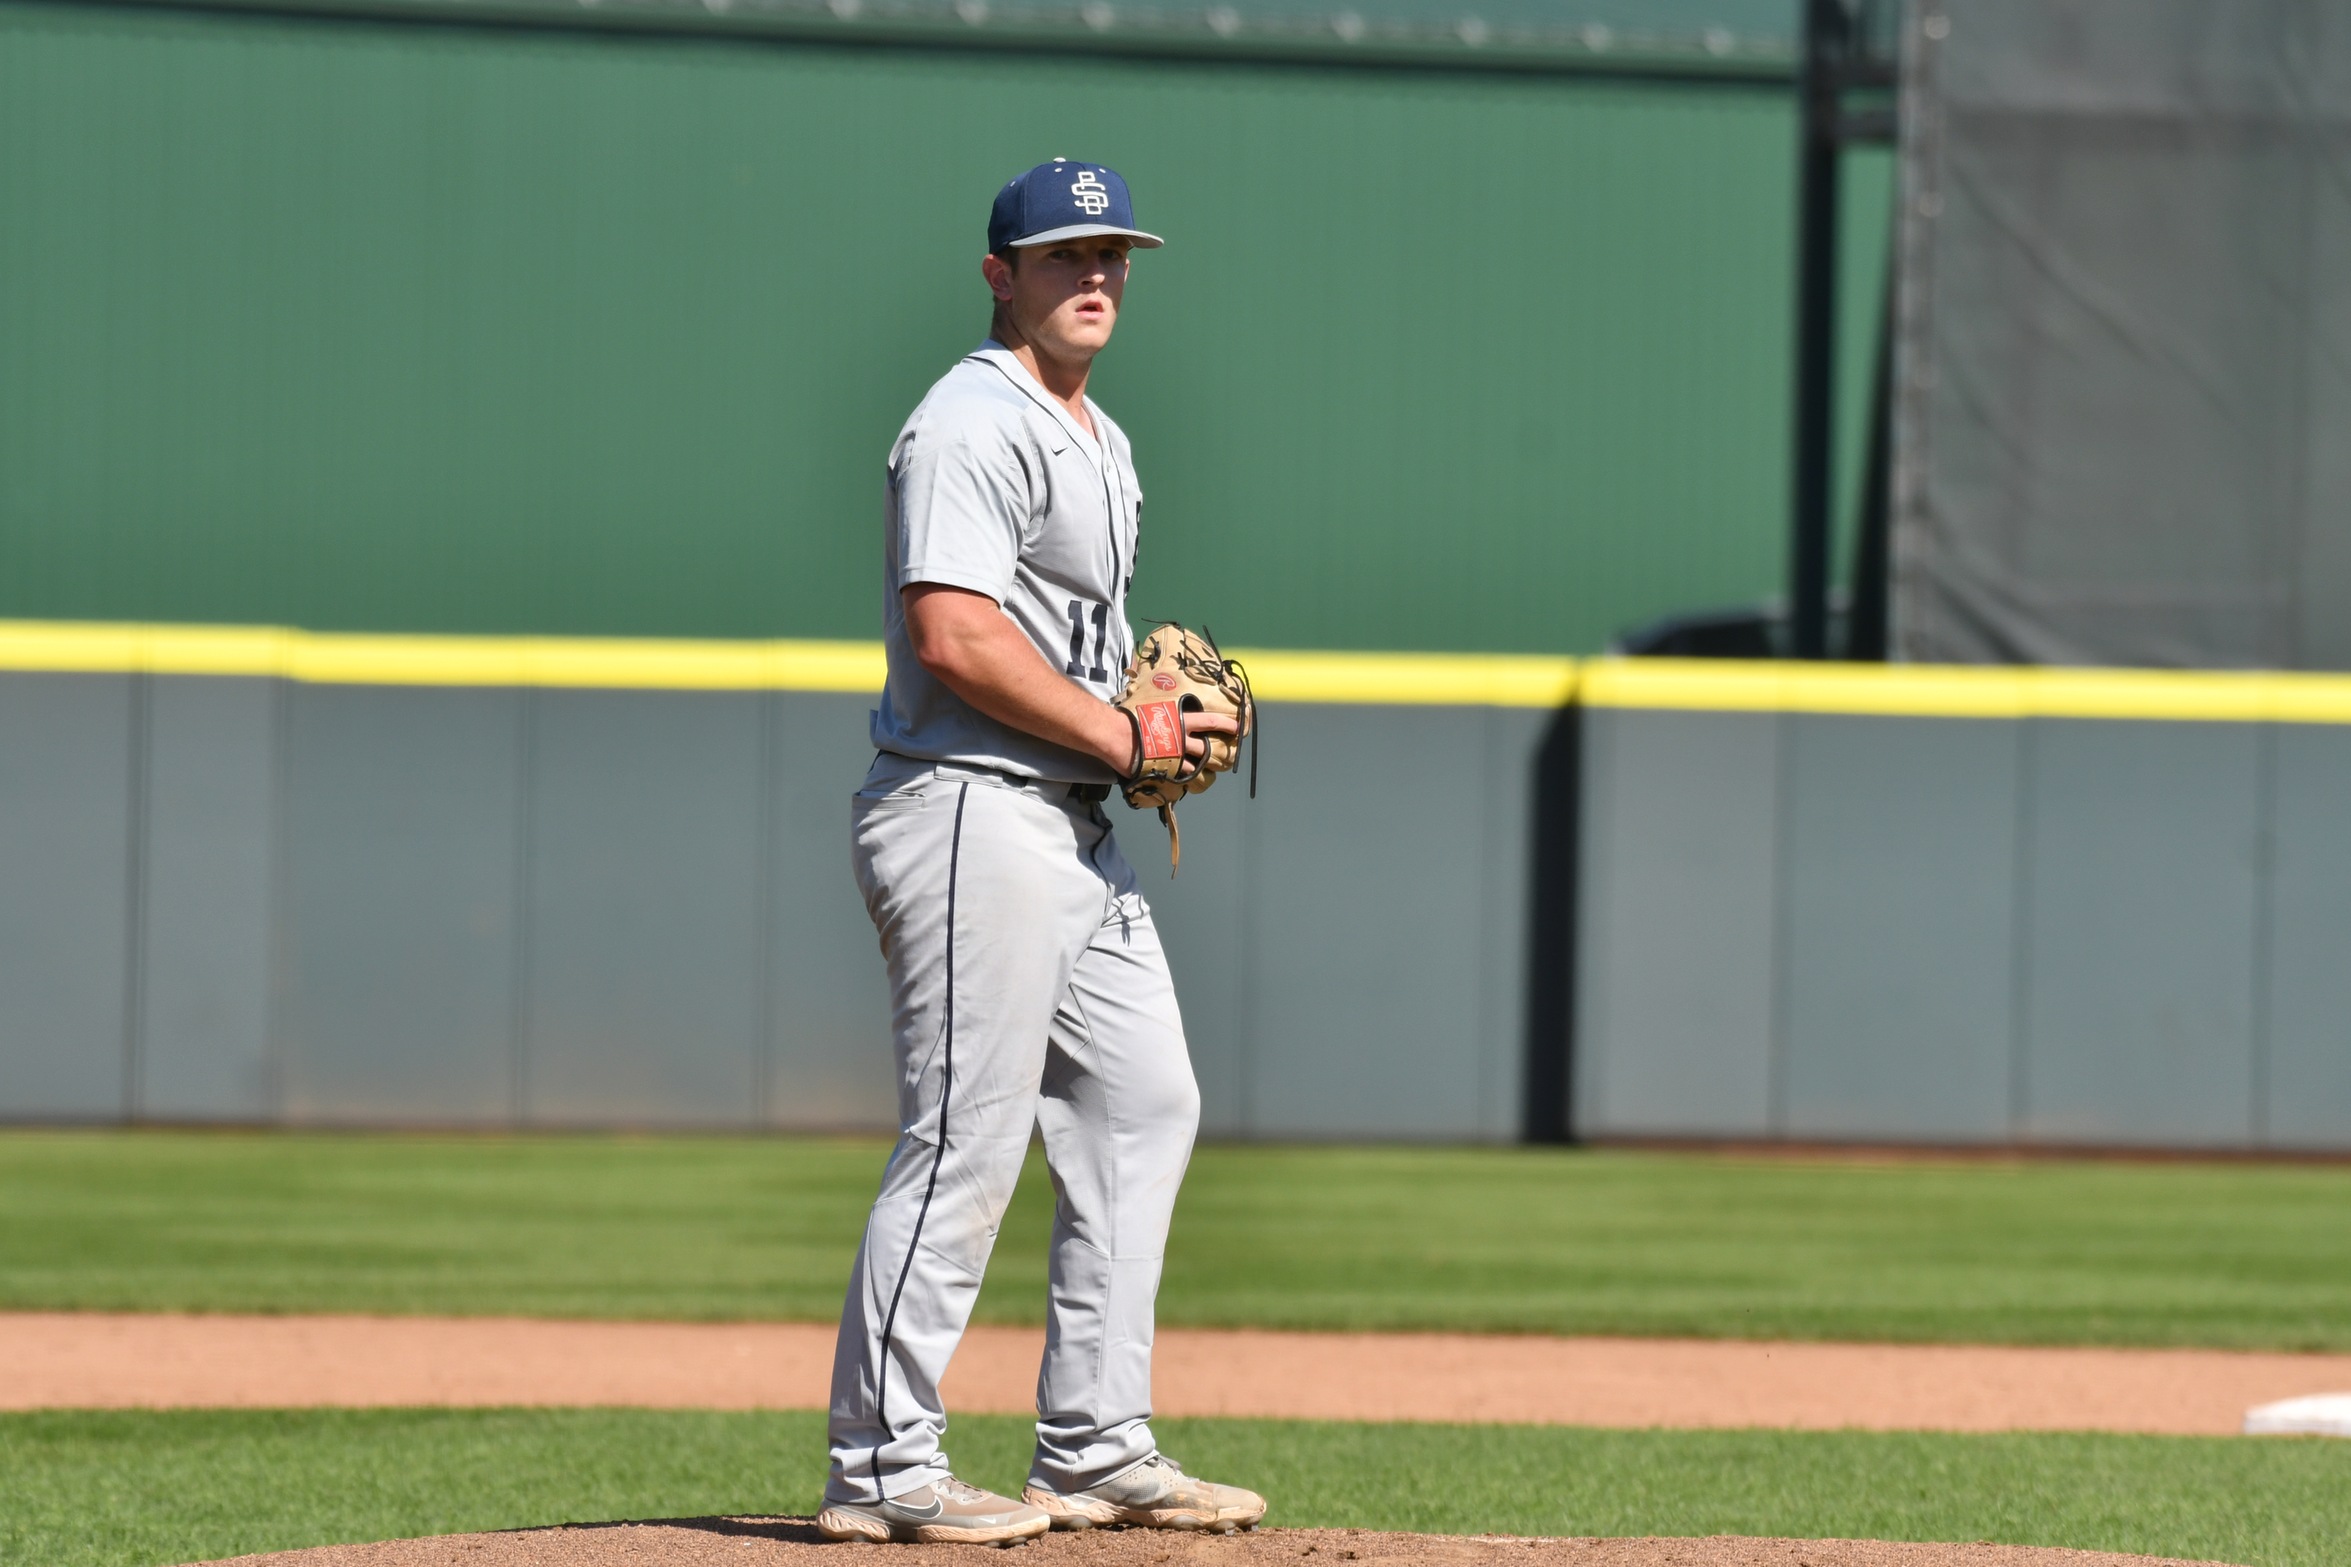 Behrend Adds Two More AMCC Wins in Conference Sweep of Altoona